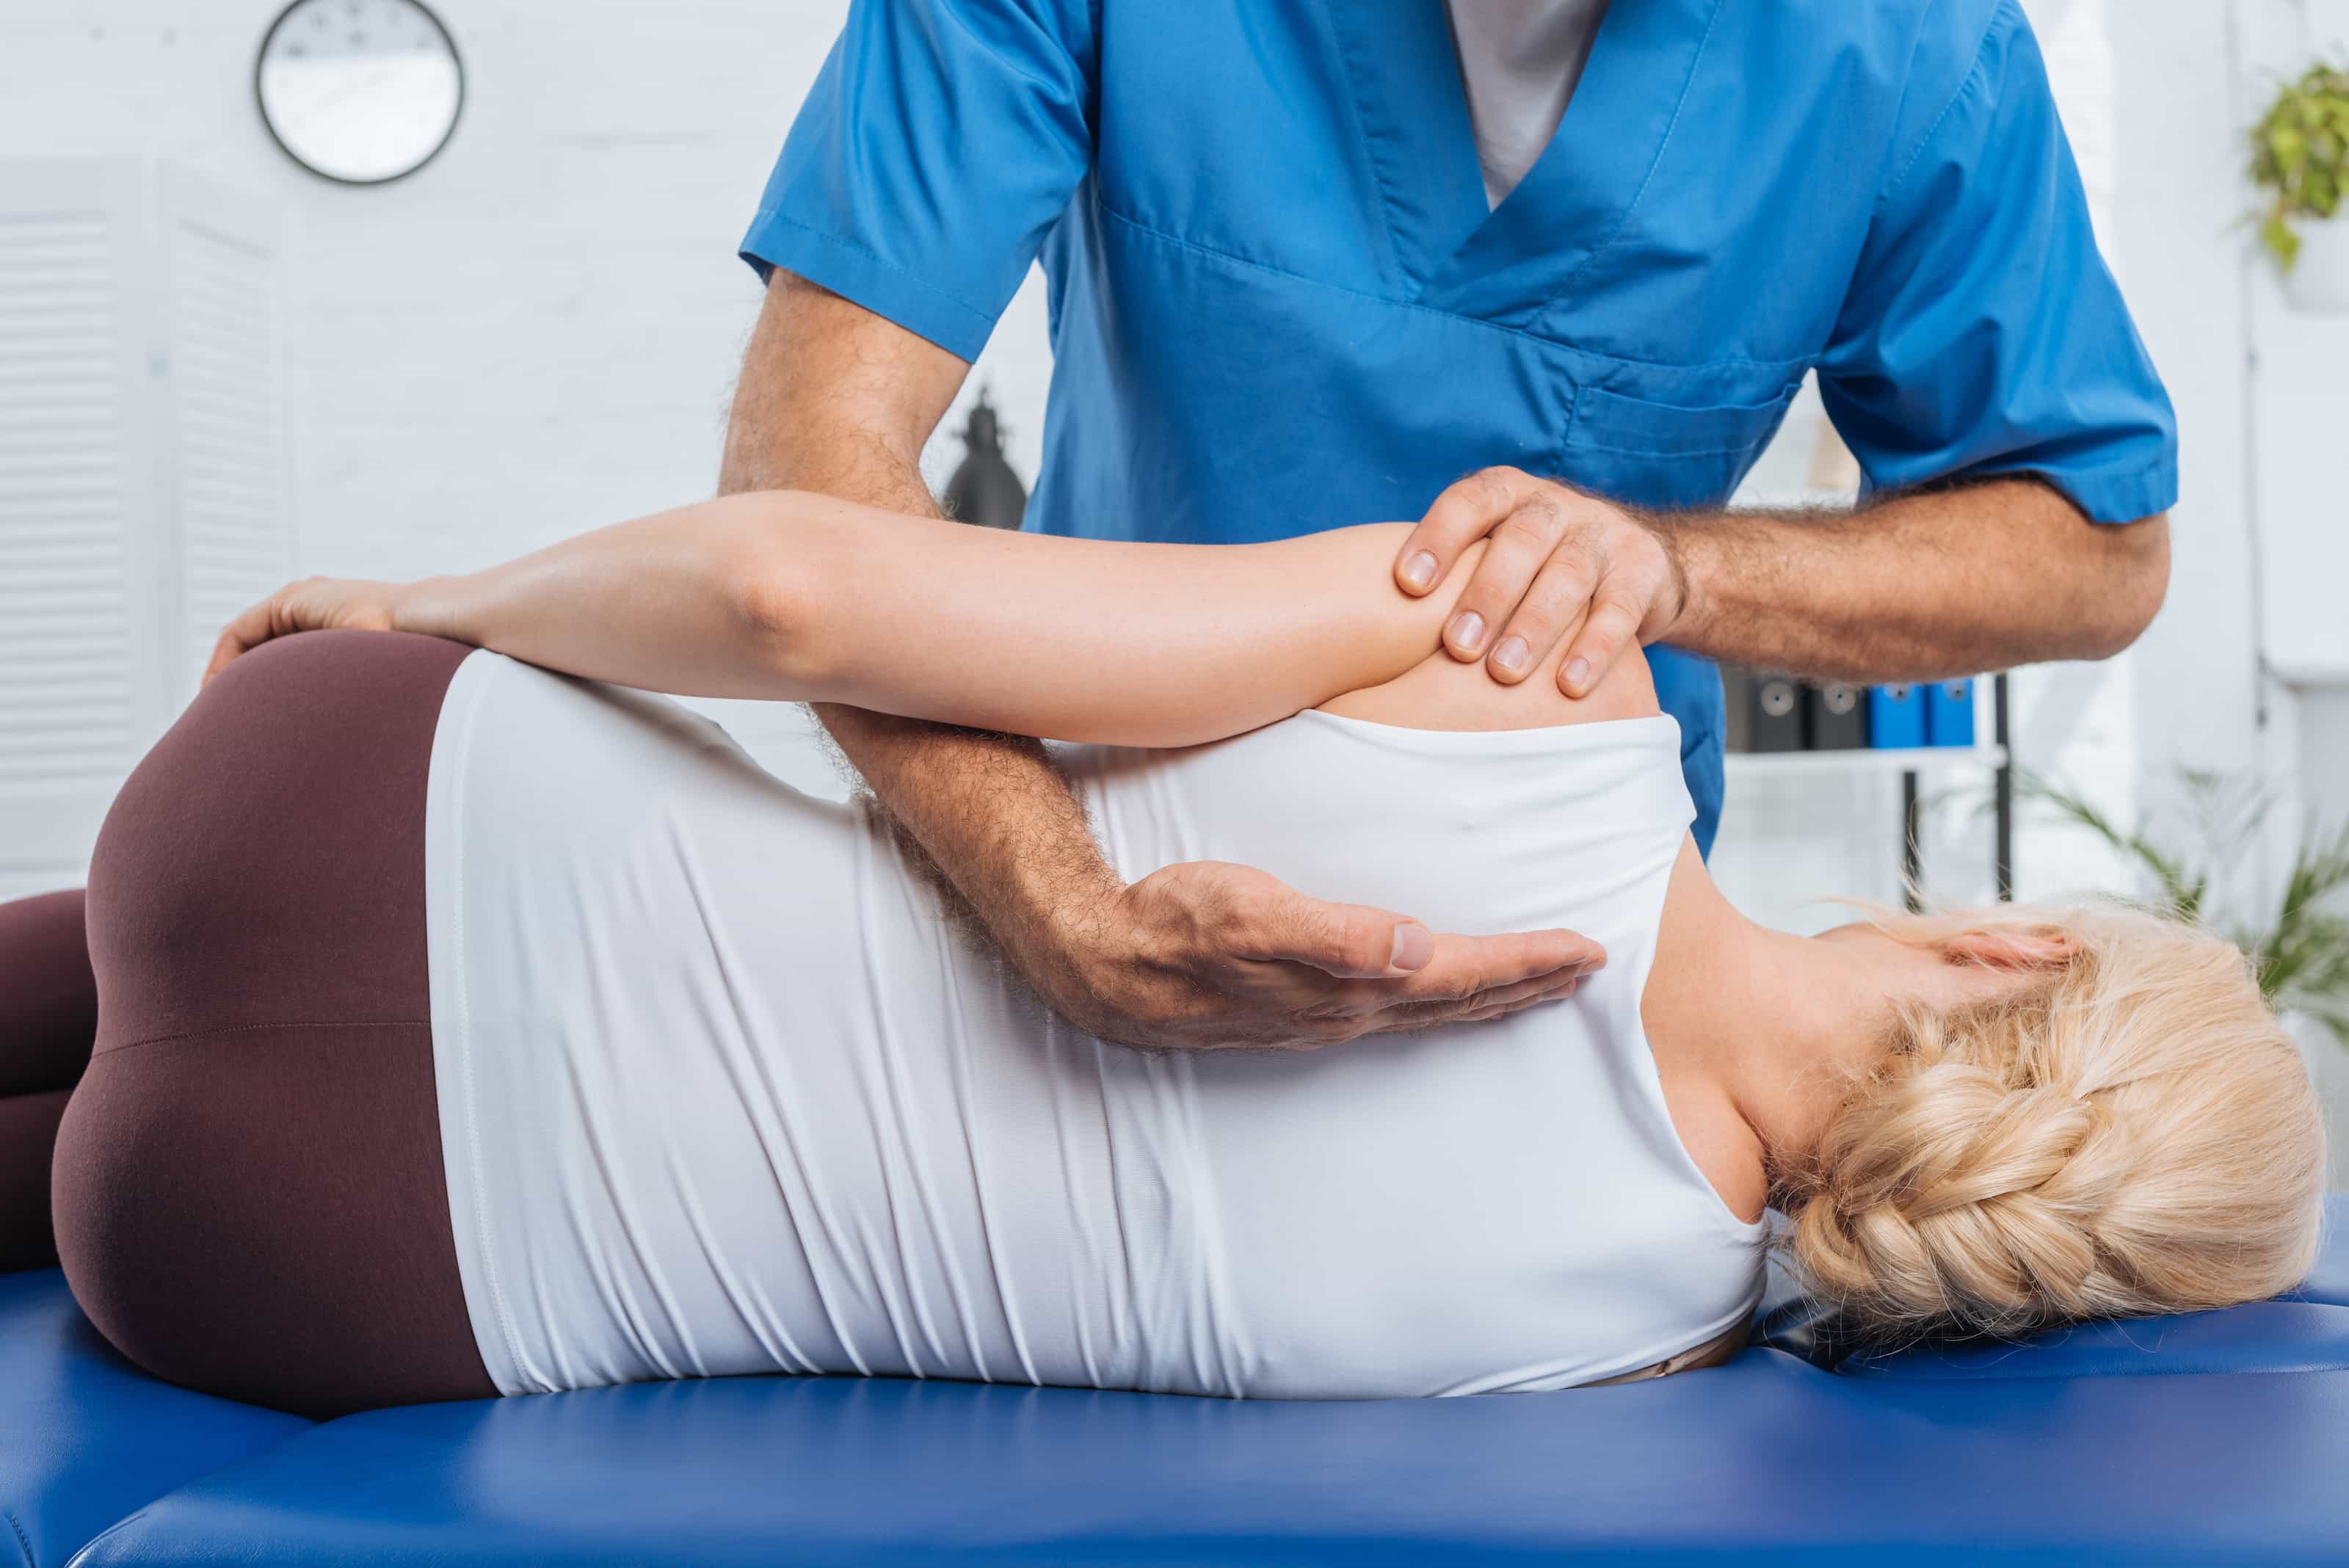 Chiropractor giving a back adjustment to a woman